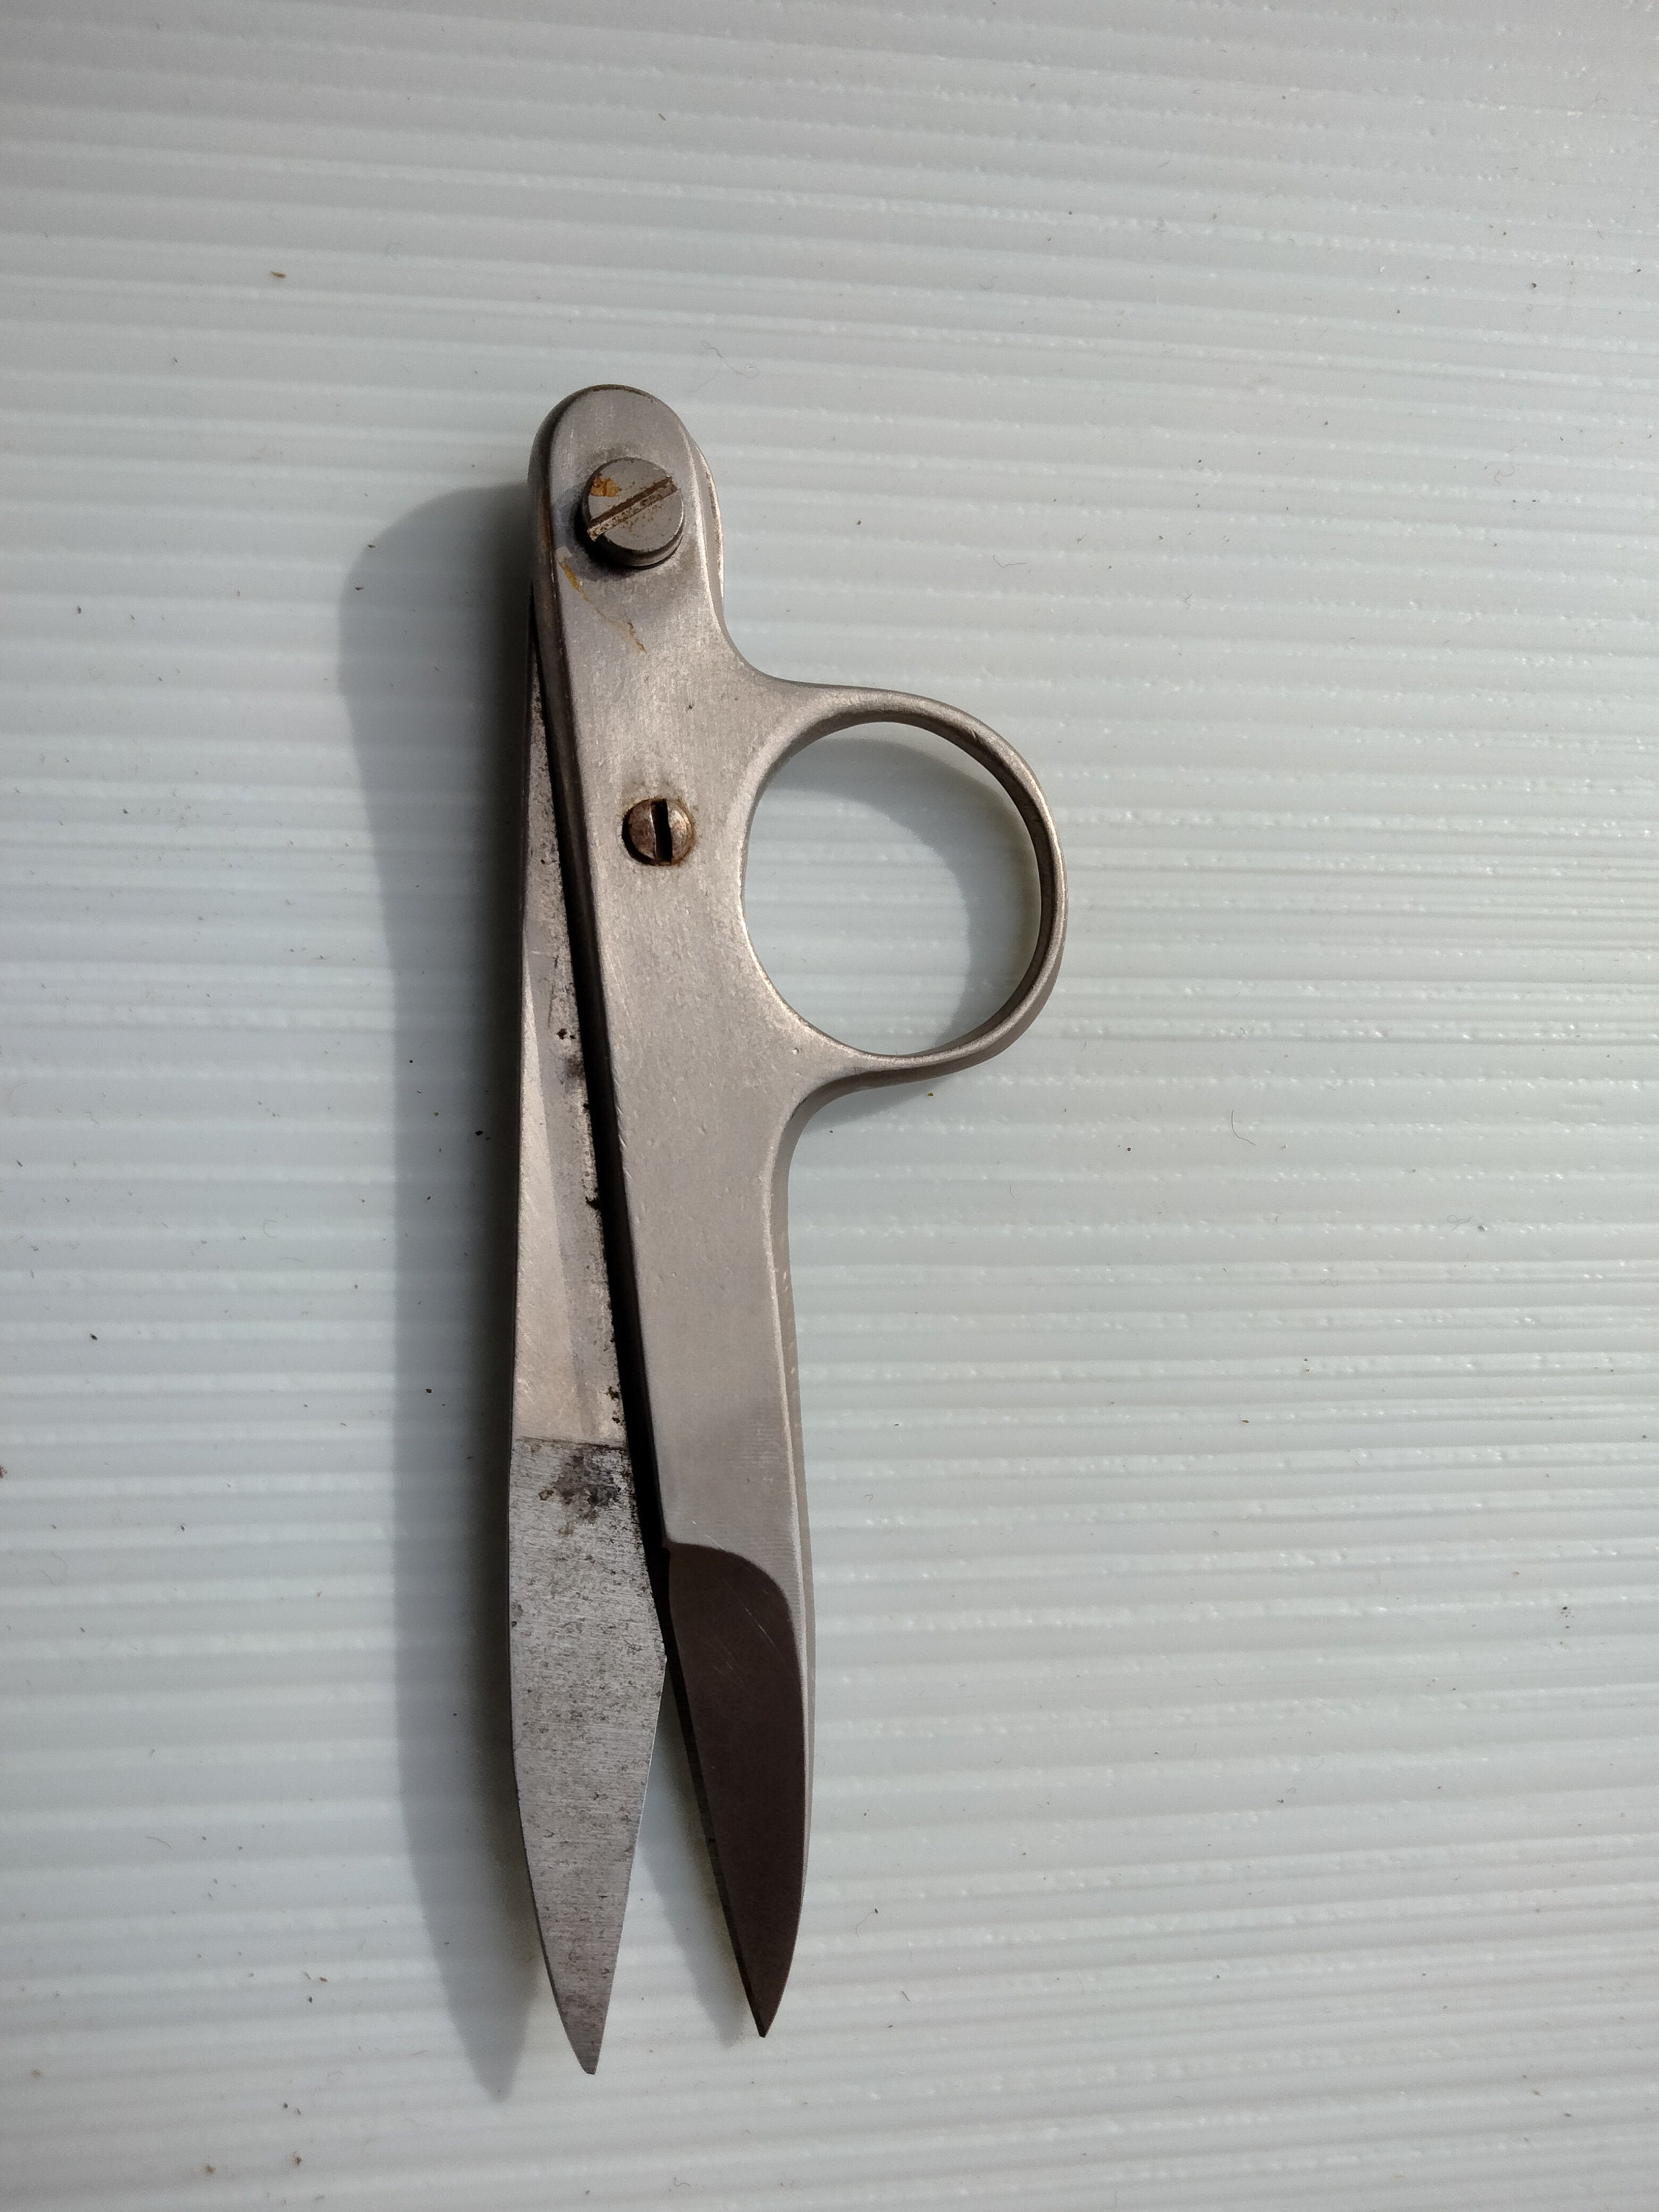 Wiss Sewing & Embroidery Scissors, 4 1/8 in 764